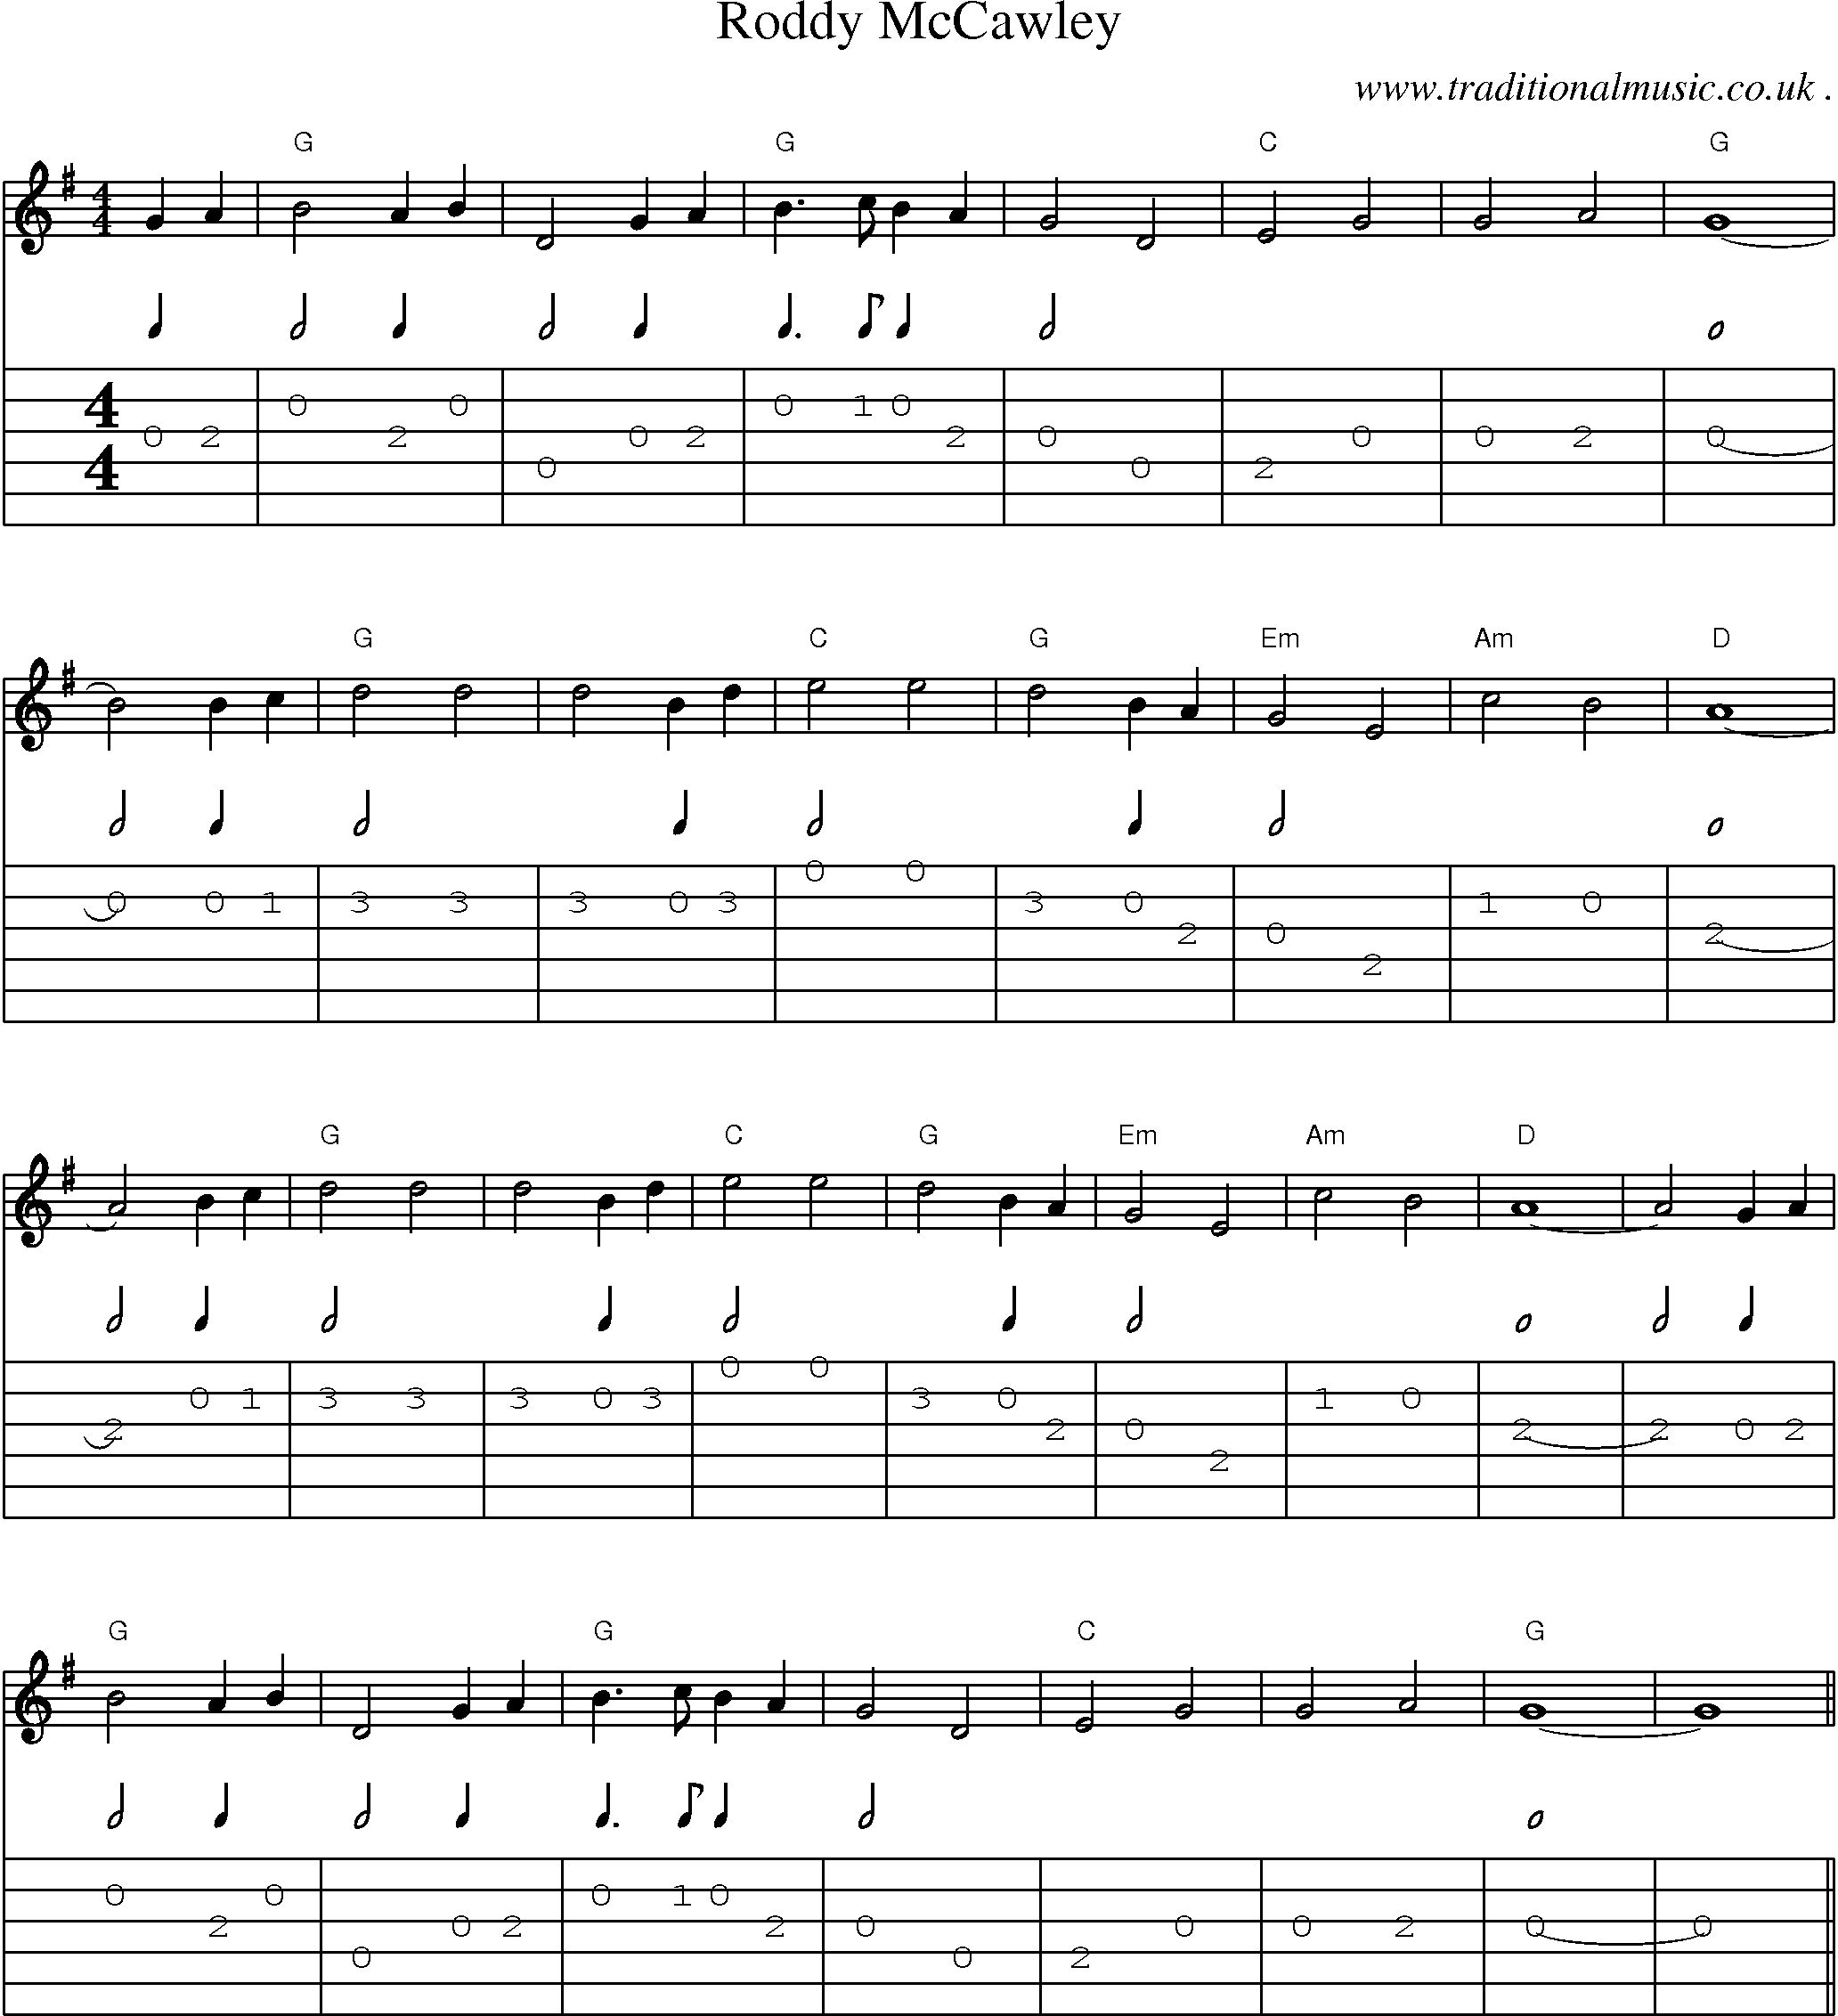 Sheet-Music and Guitar Tabs for Roddy Mccawley